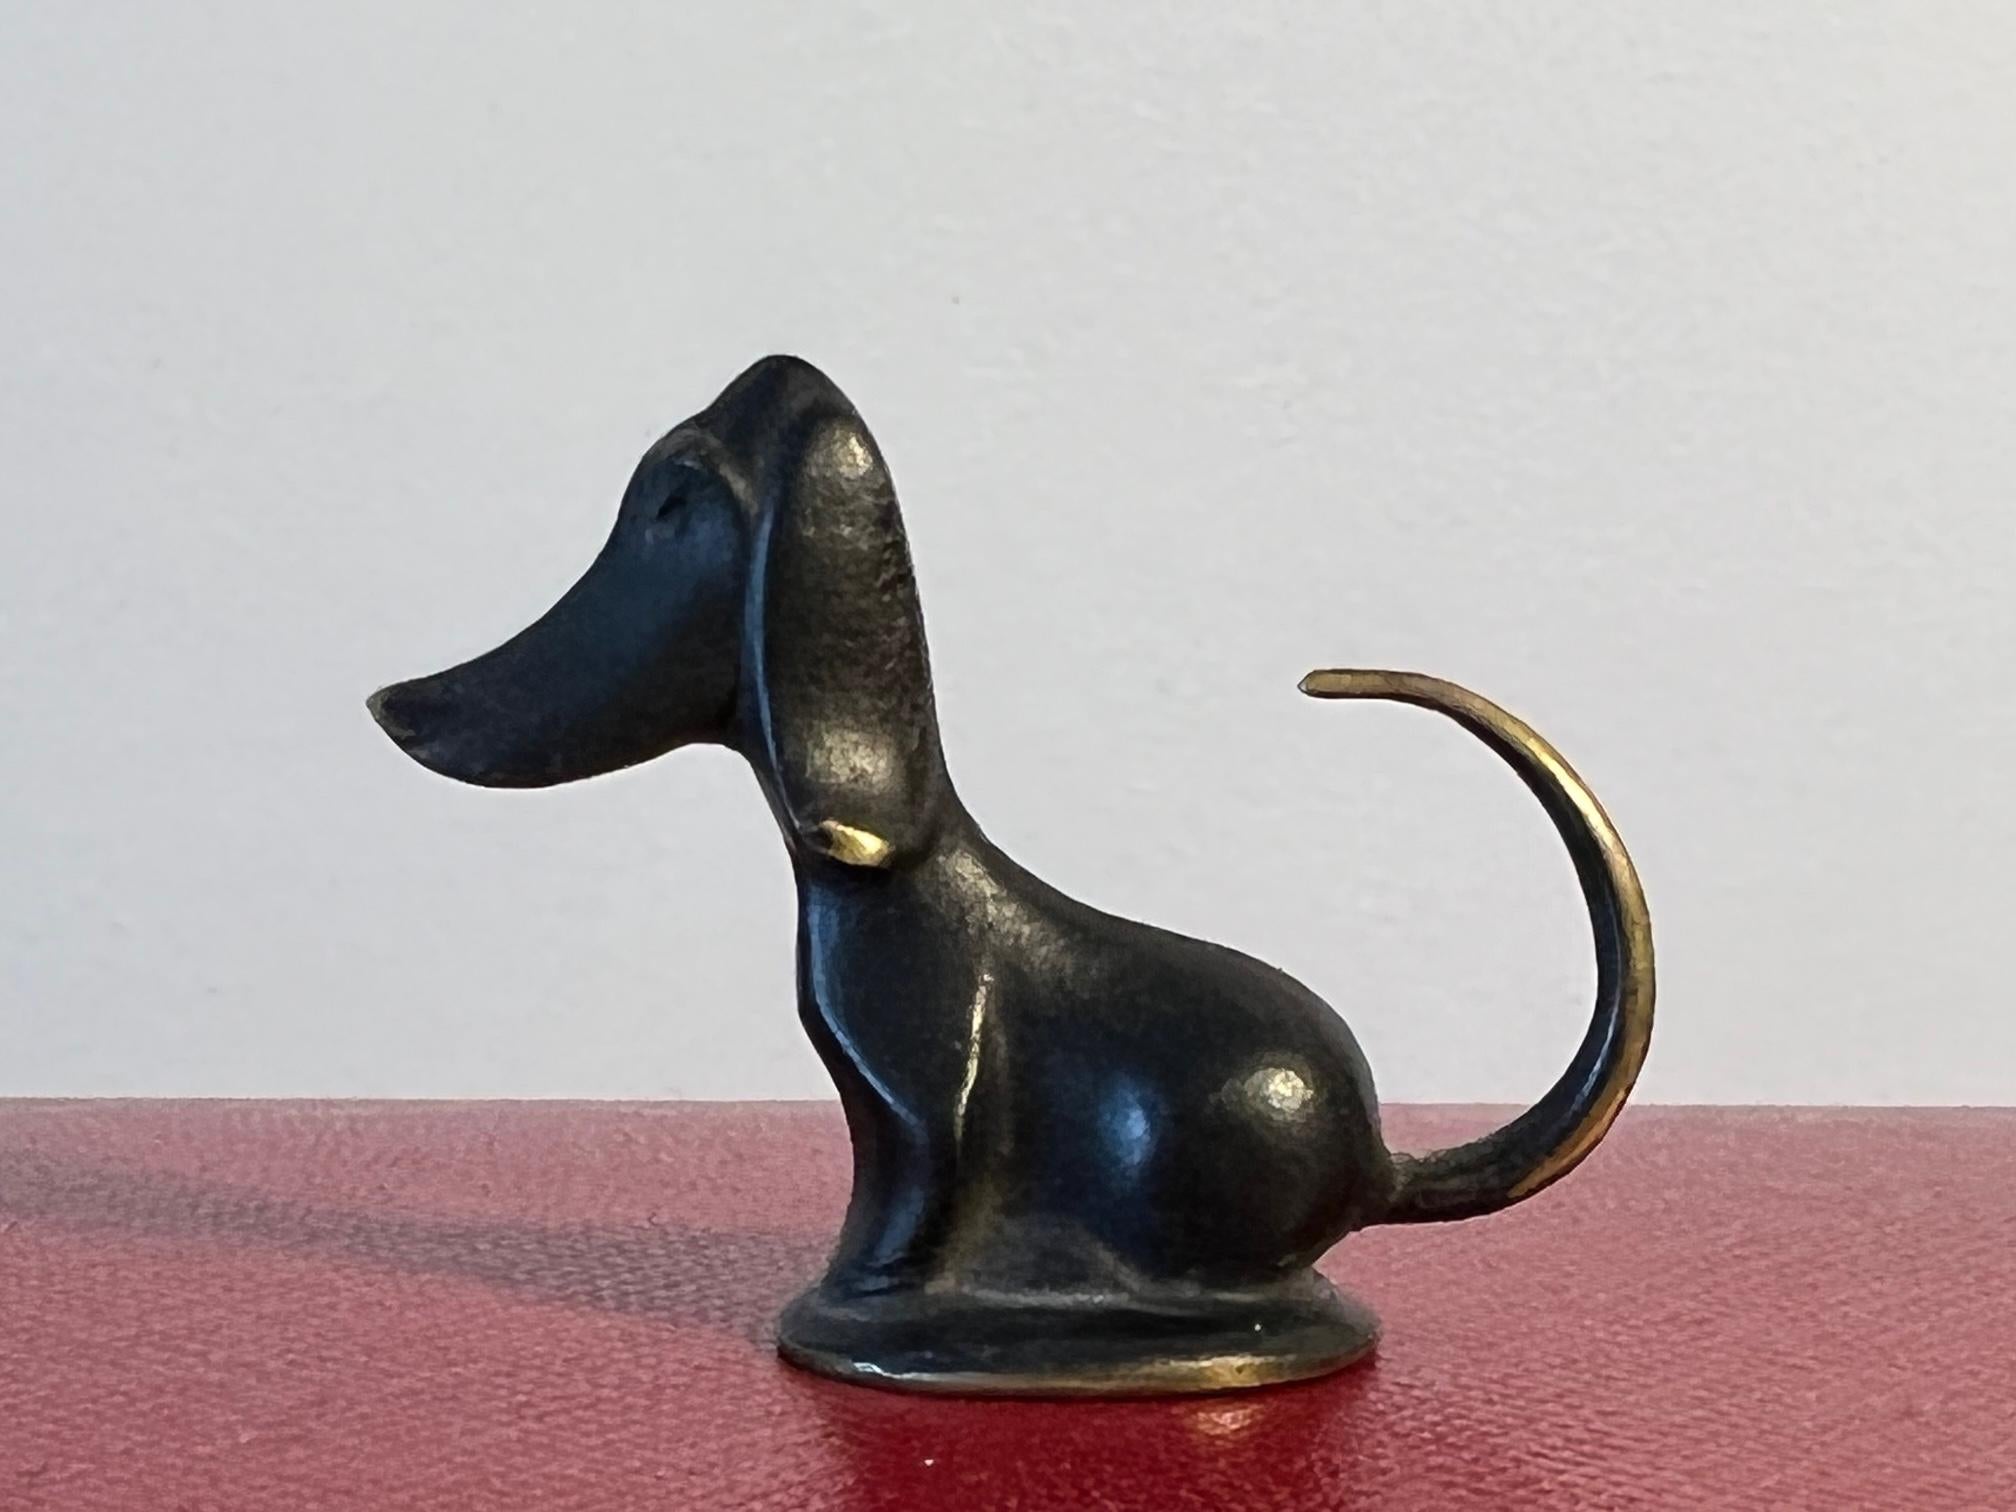 A stylish and stylized miniature dachshund by Werkstatte Haugenauer Wienm made in Austria. Very charming and beautifully made of cast bronze, signed on the bottom.